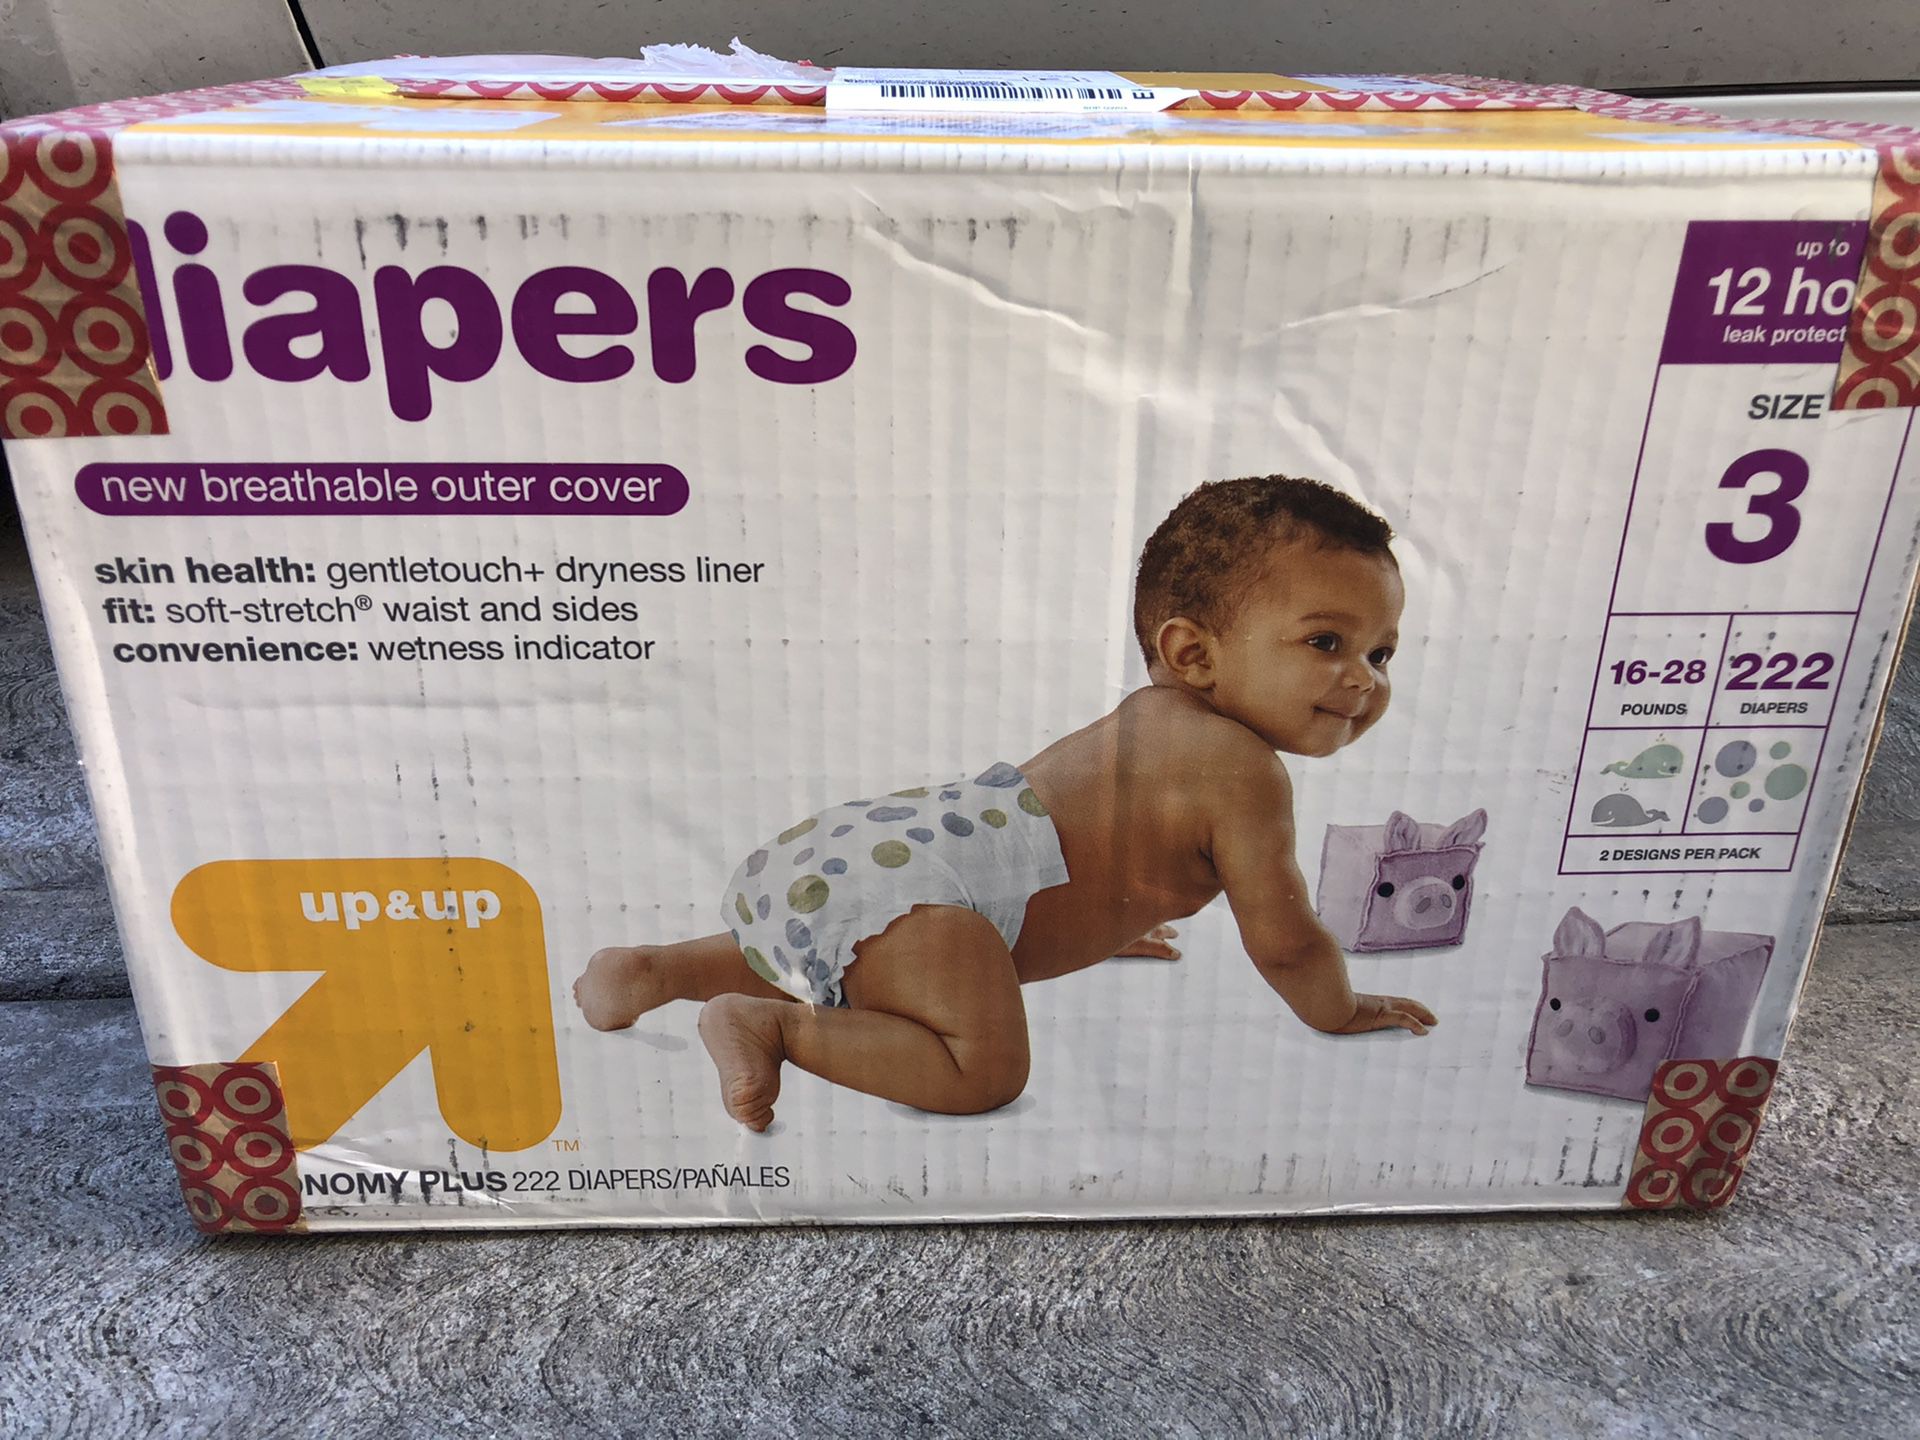 Up and Up Diapers size 3